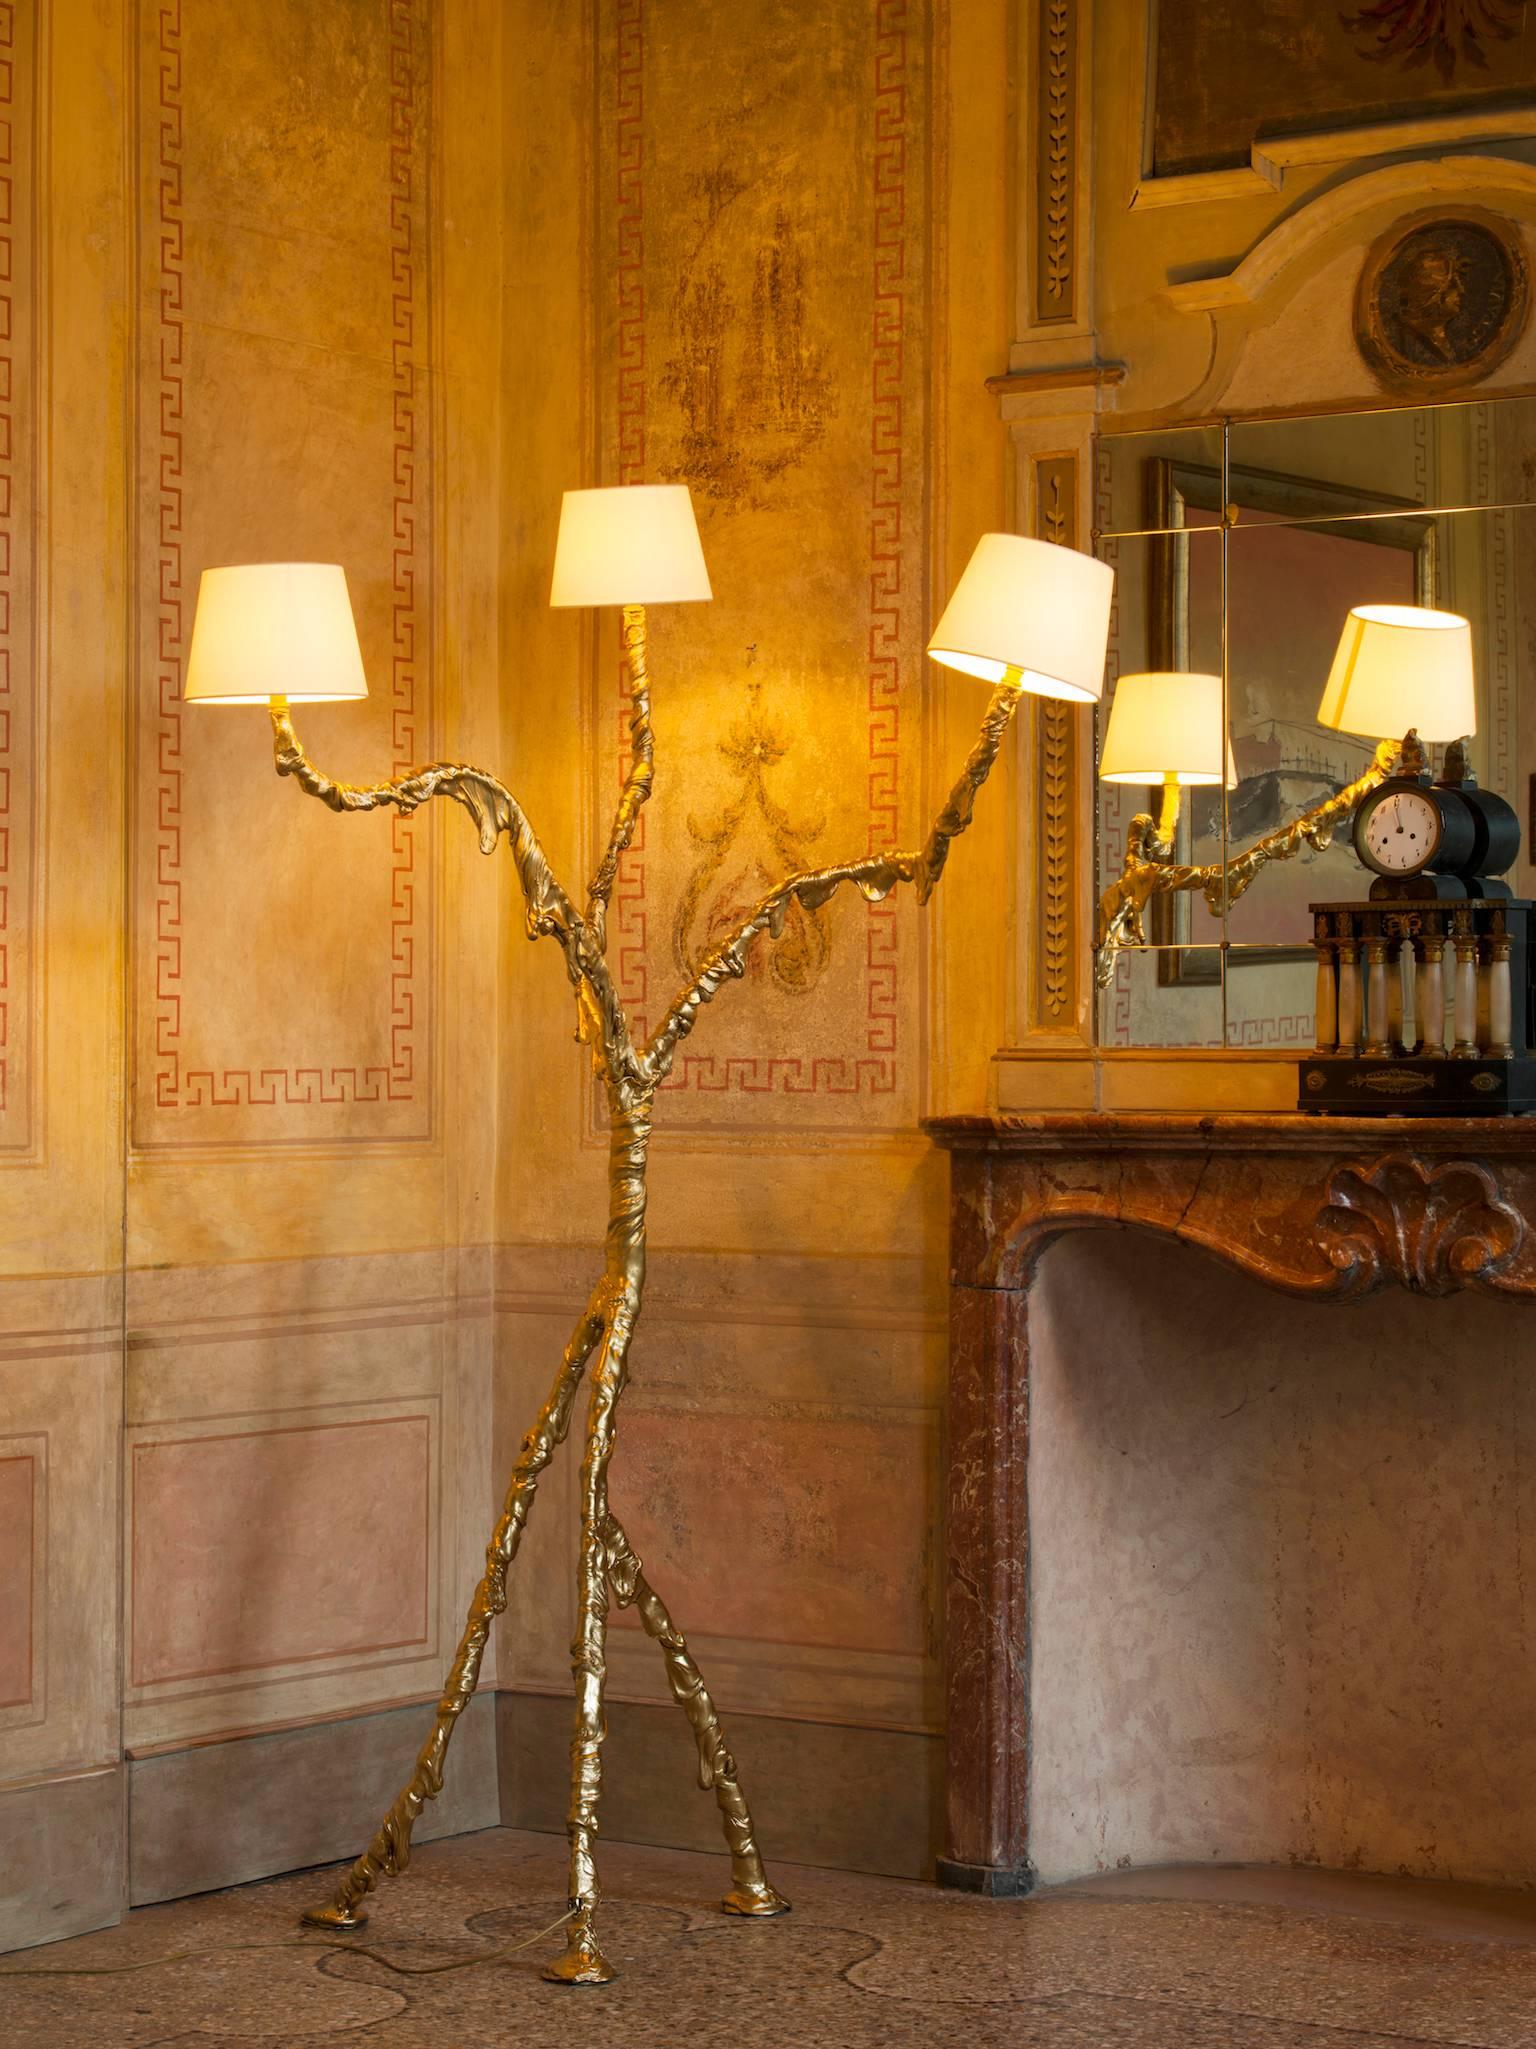 It is a polymorphic lamp. Sinuous and slender with very long legs. It is precious, coated with “pure gold.” It has a stem that branches out like a tree, the dynamics and proportions of an inverted chandelier. The light is diffused by three small